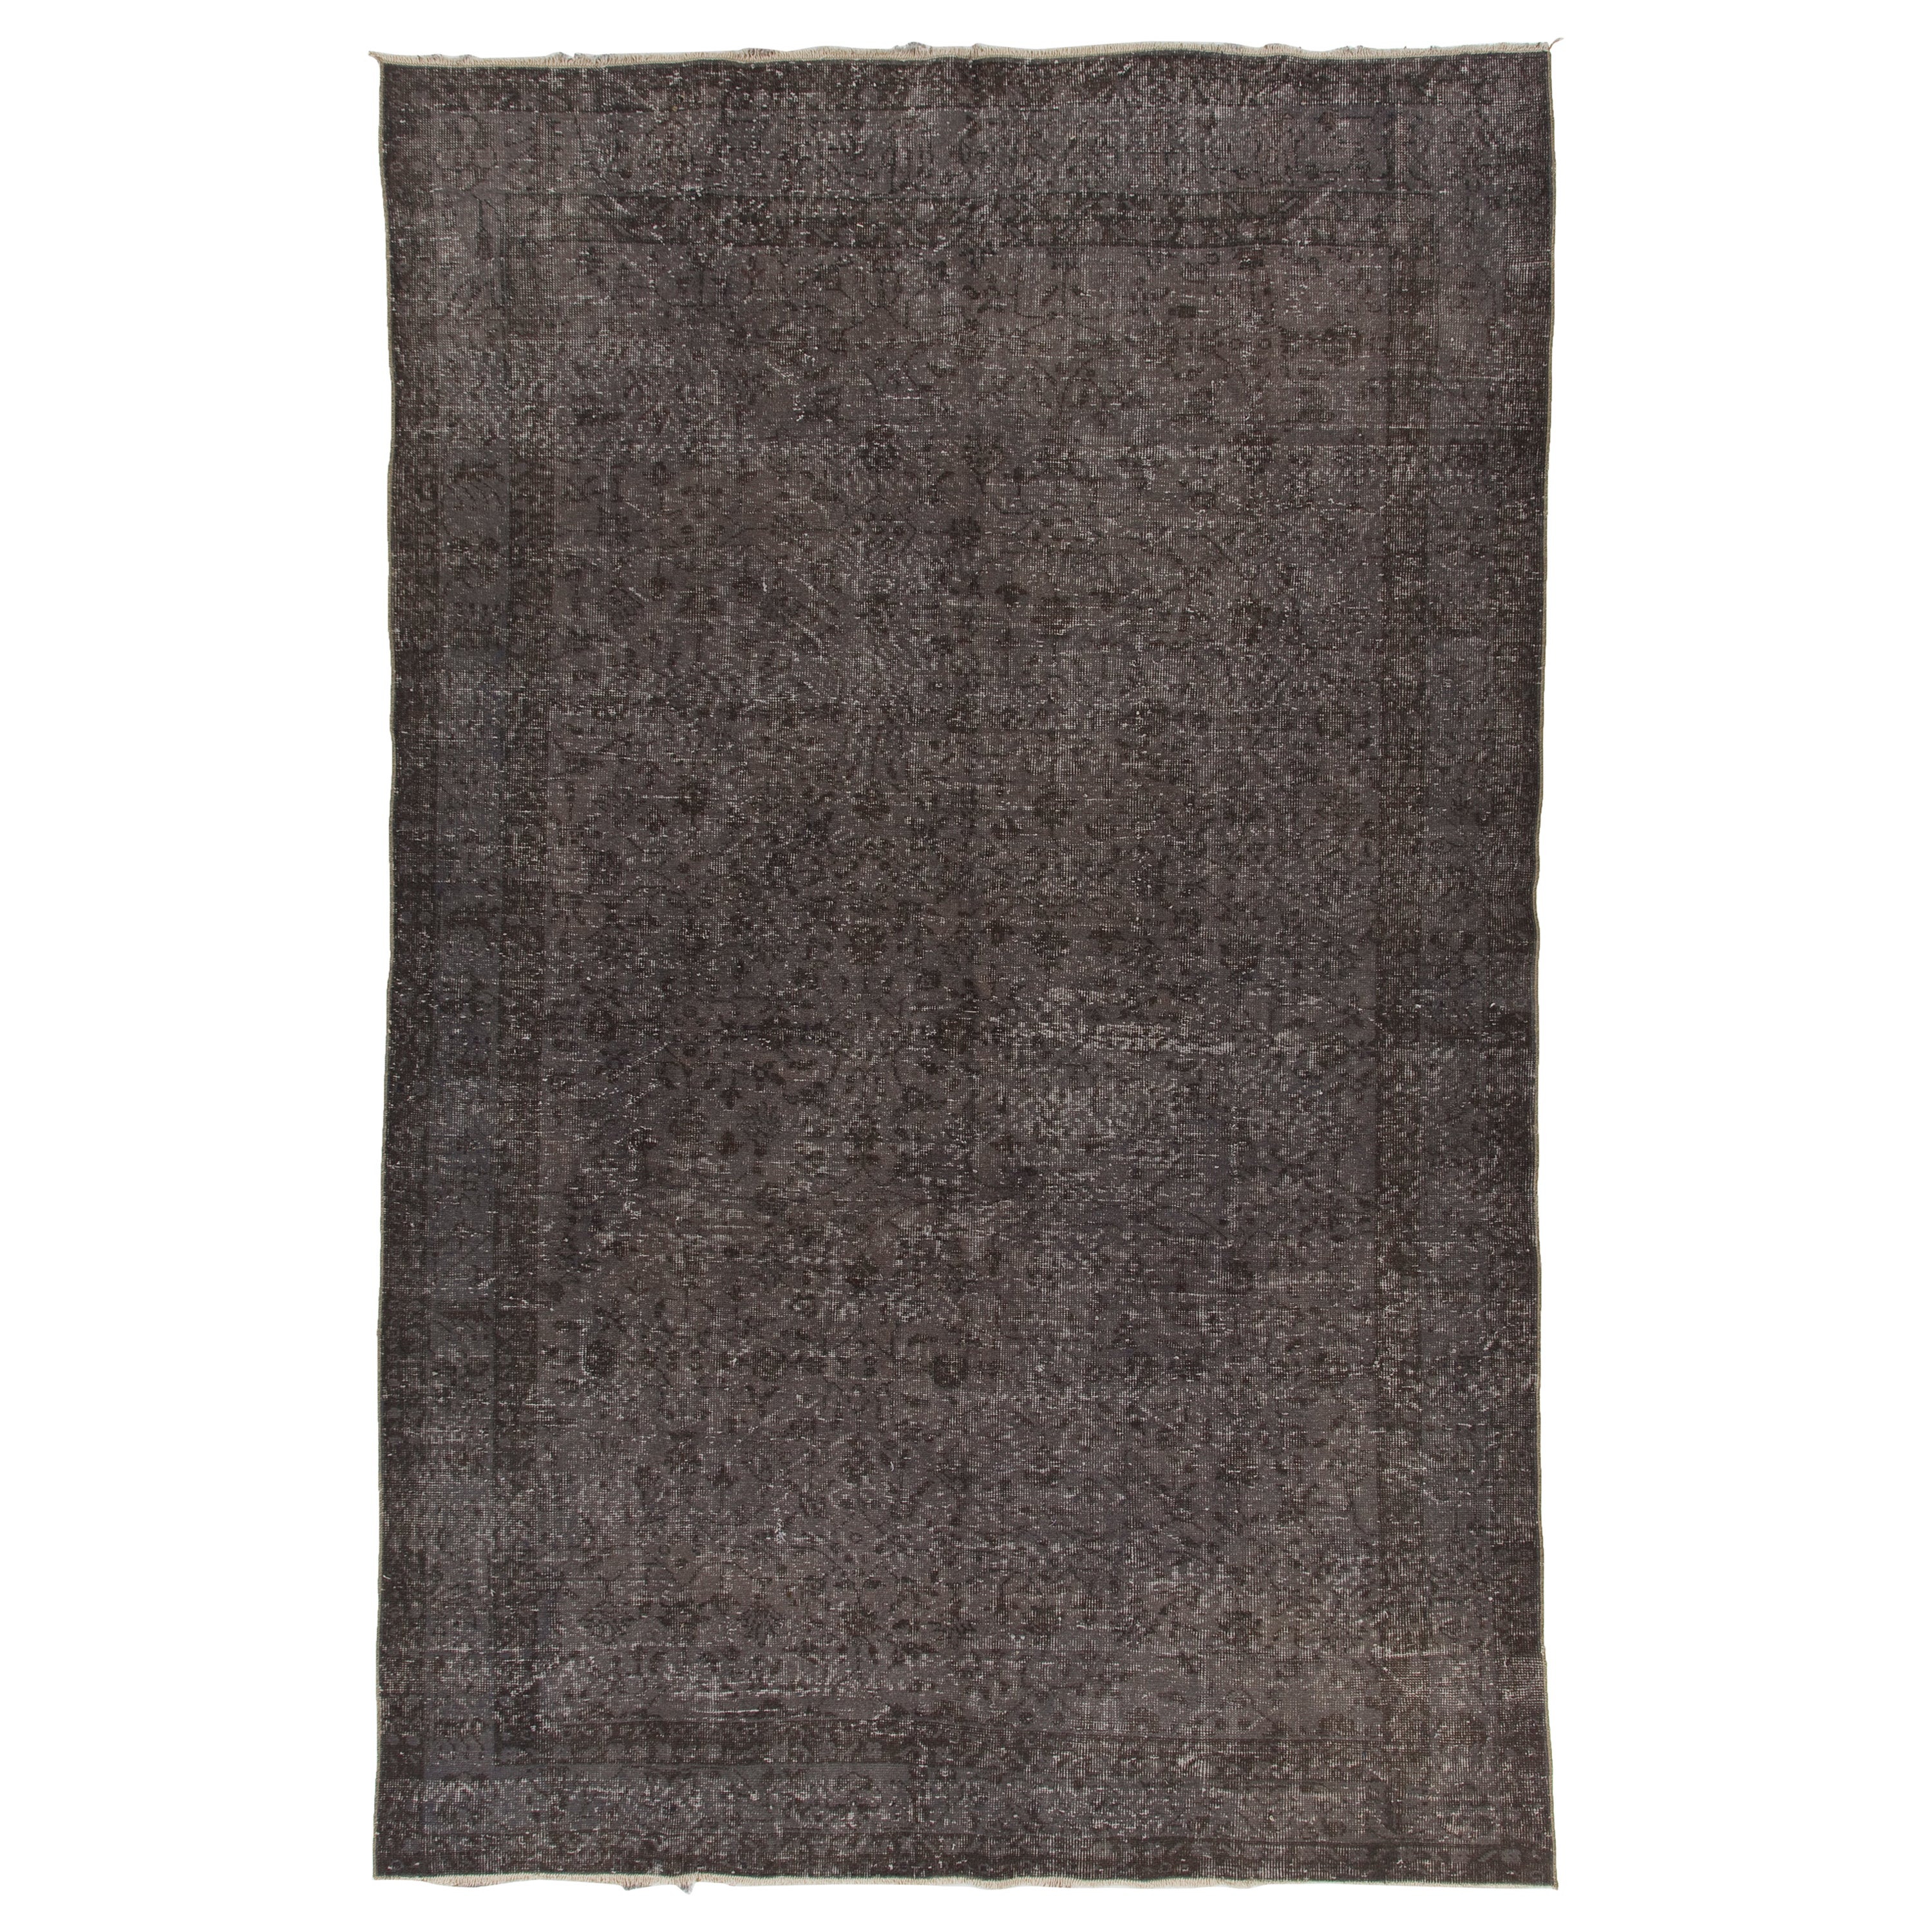 6.5x10.2 ft Vintage Handmade Area Rug with Distressed Pile Over-Dyed in Gray For Sale